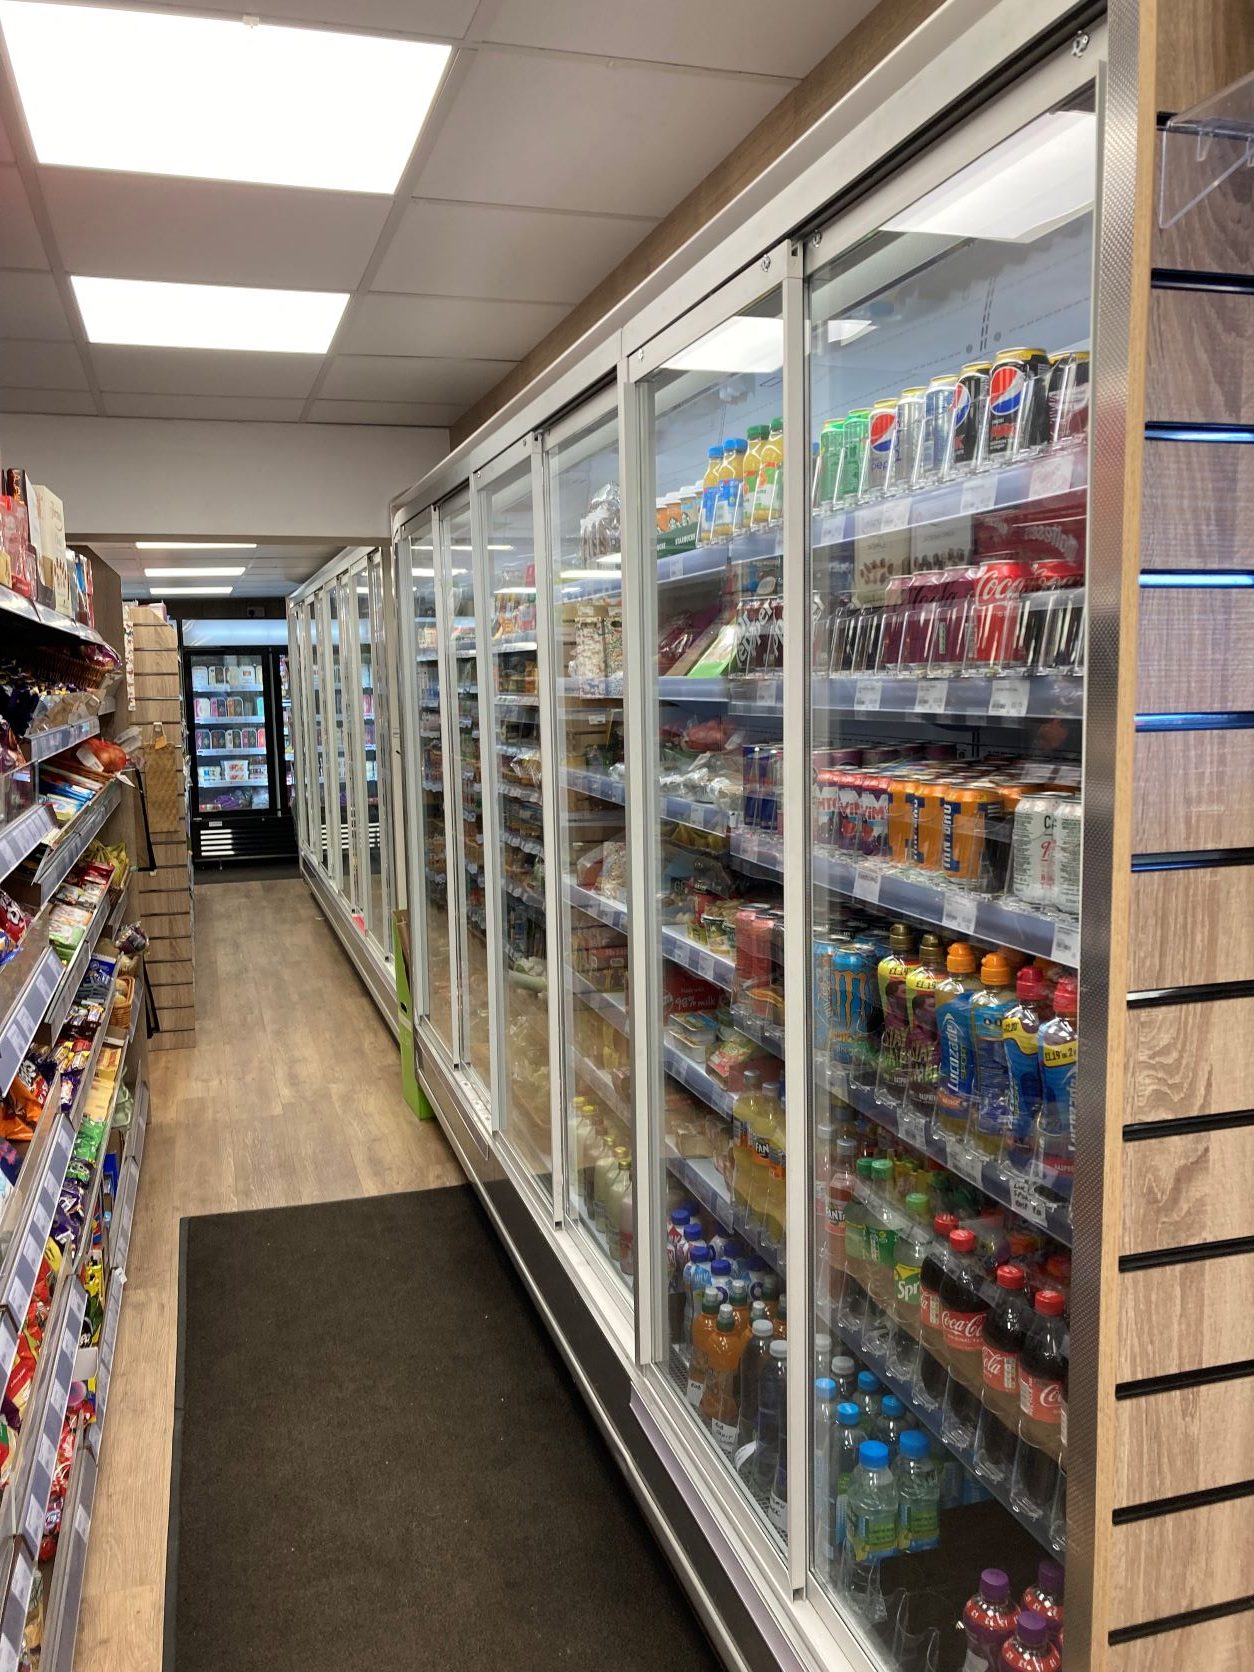 Re-fit livens up Nisa store in Cumbria